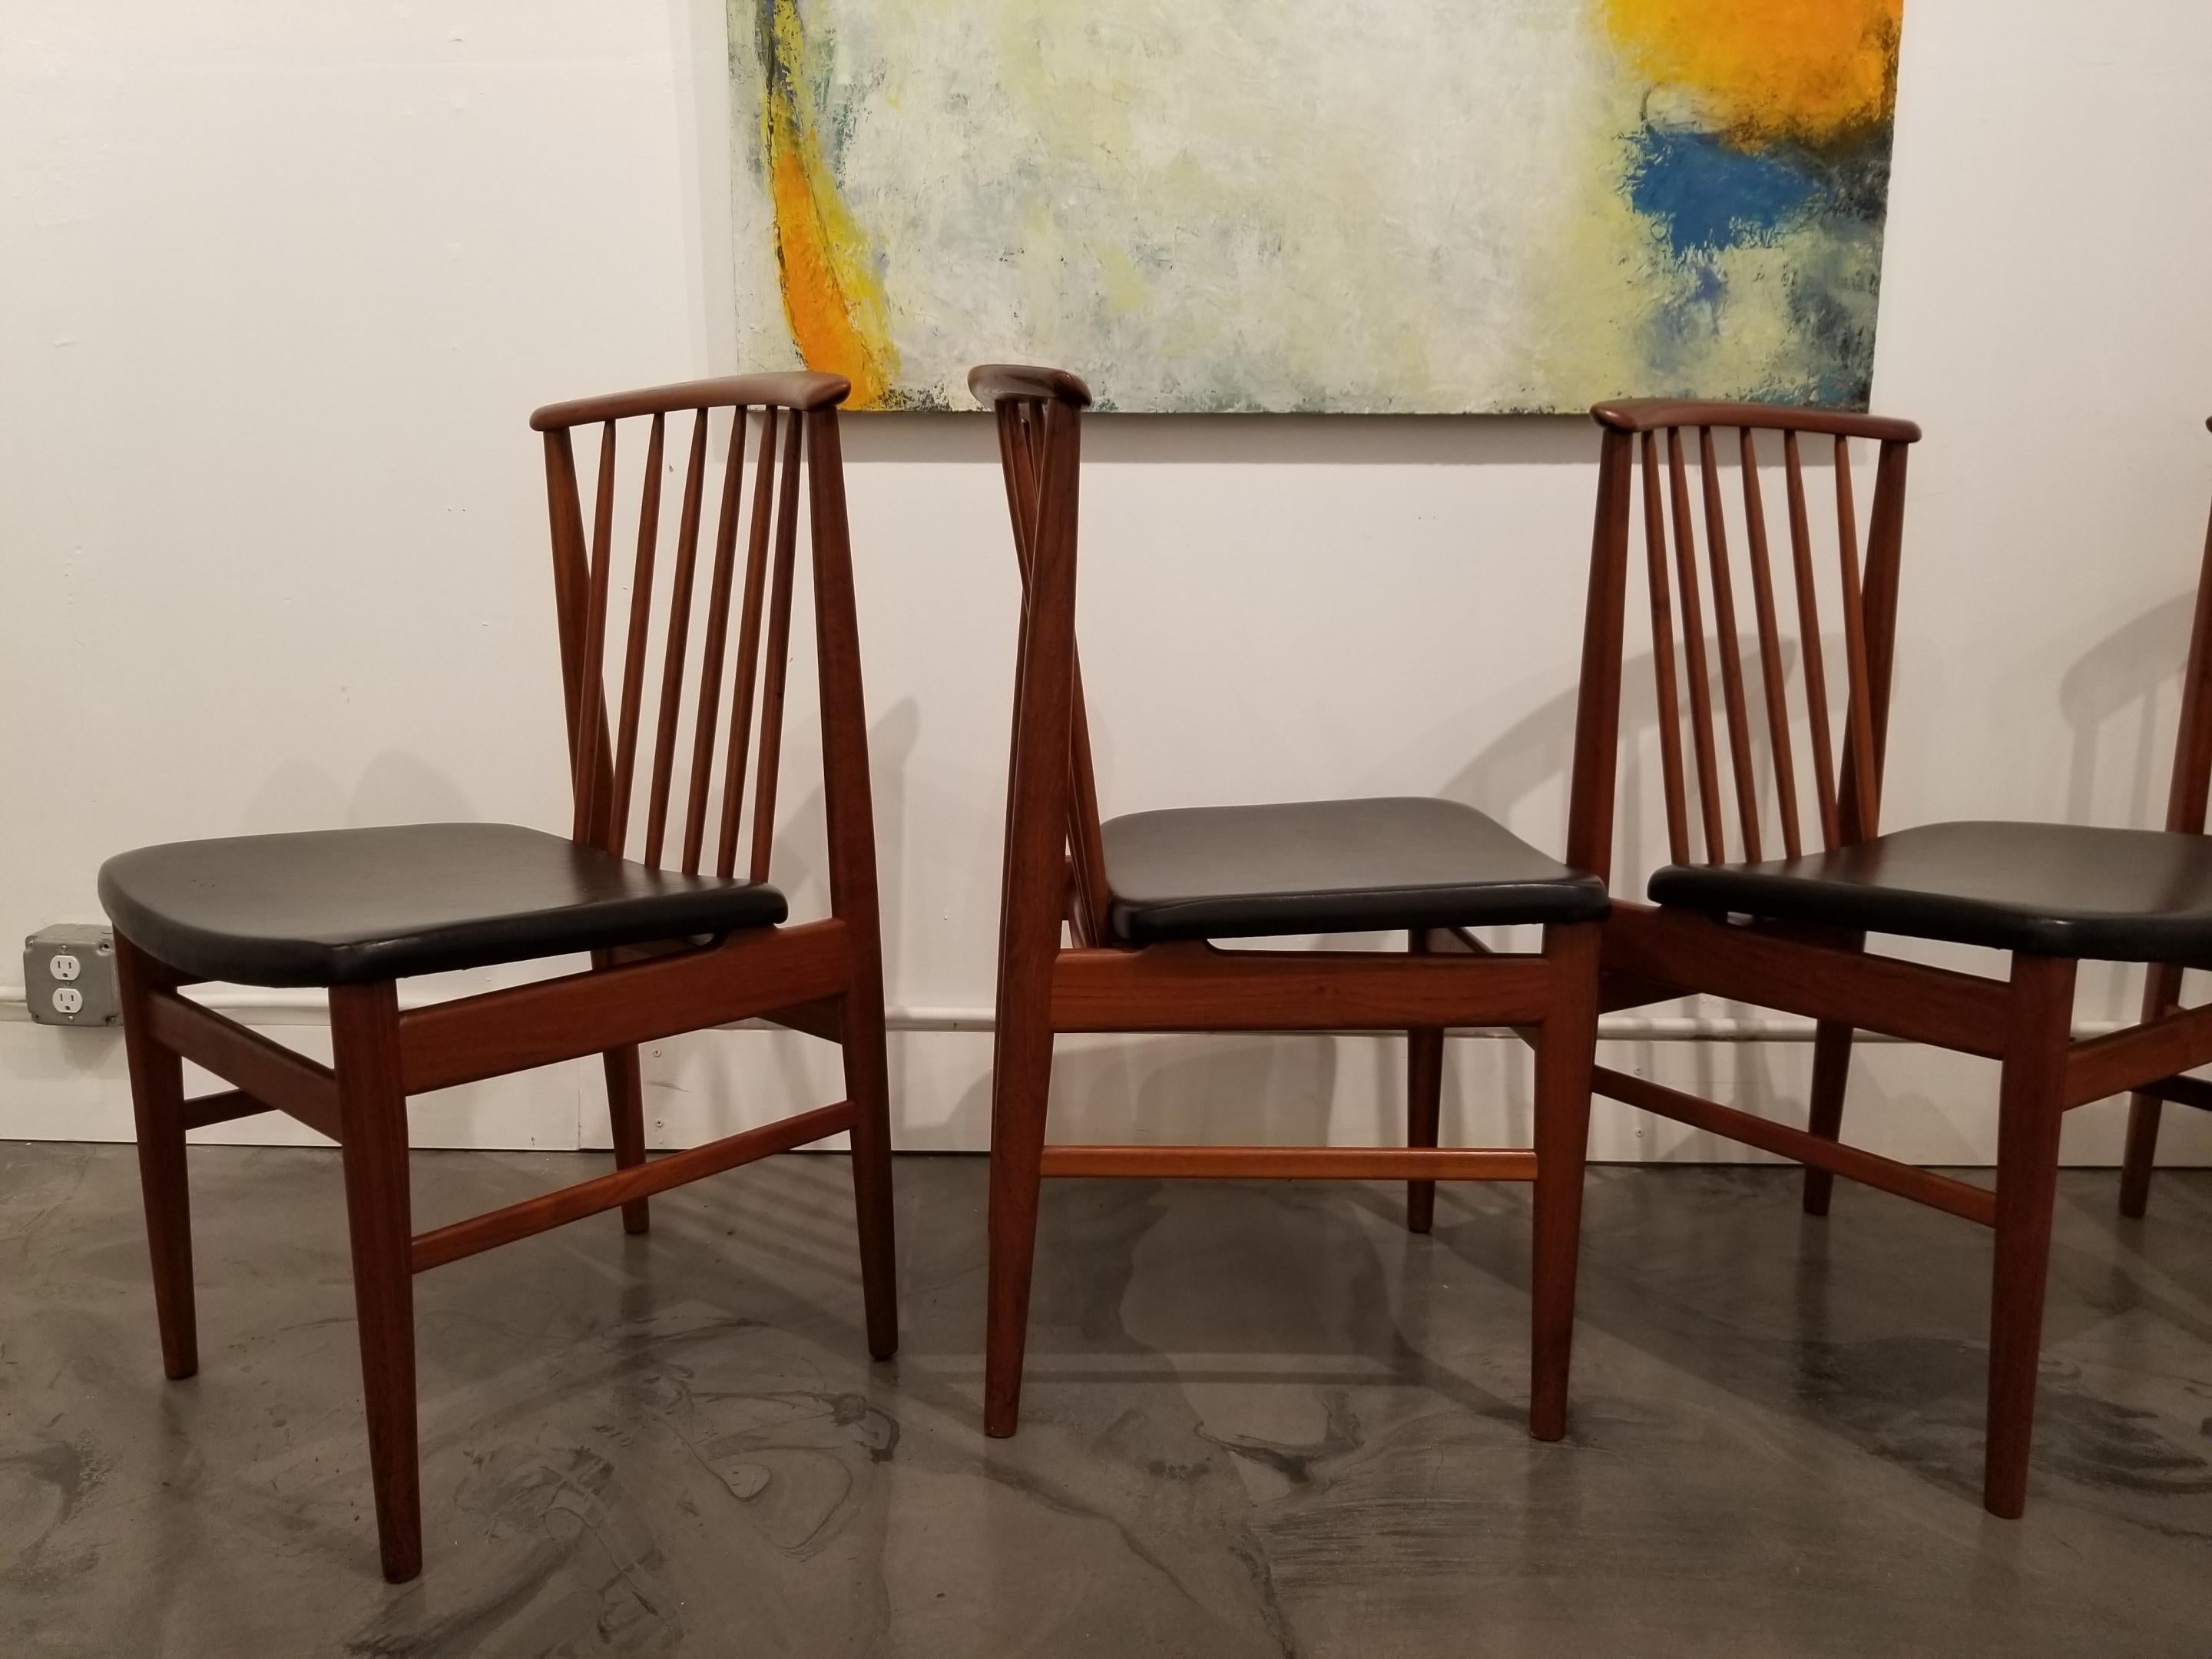 Mid-20th Century Teak Dining Chairs by Sylve Stenquist for DUX 